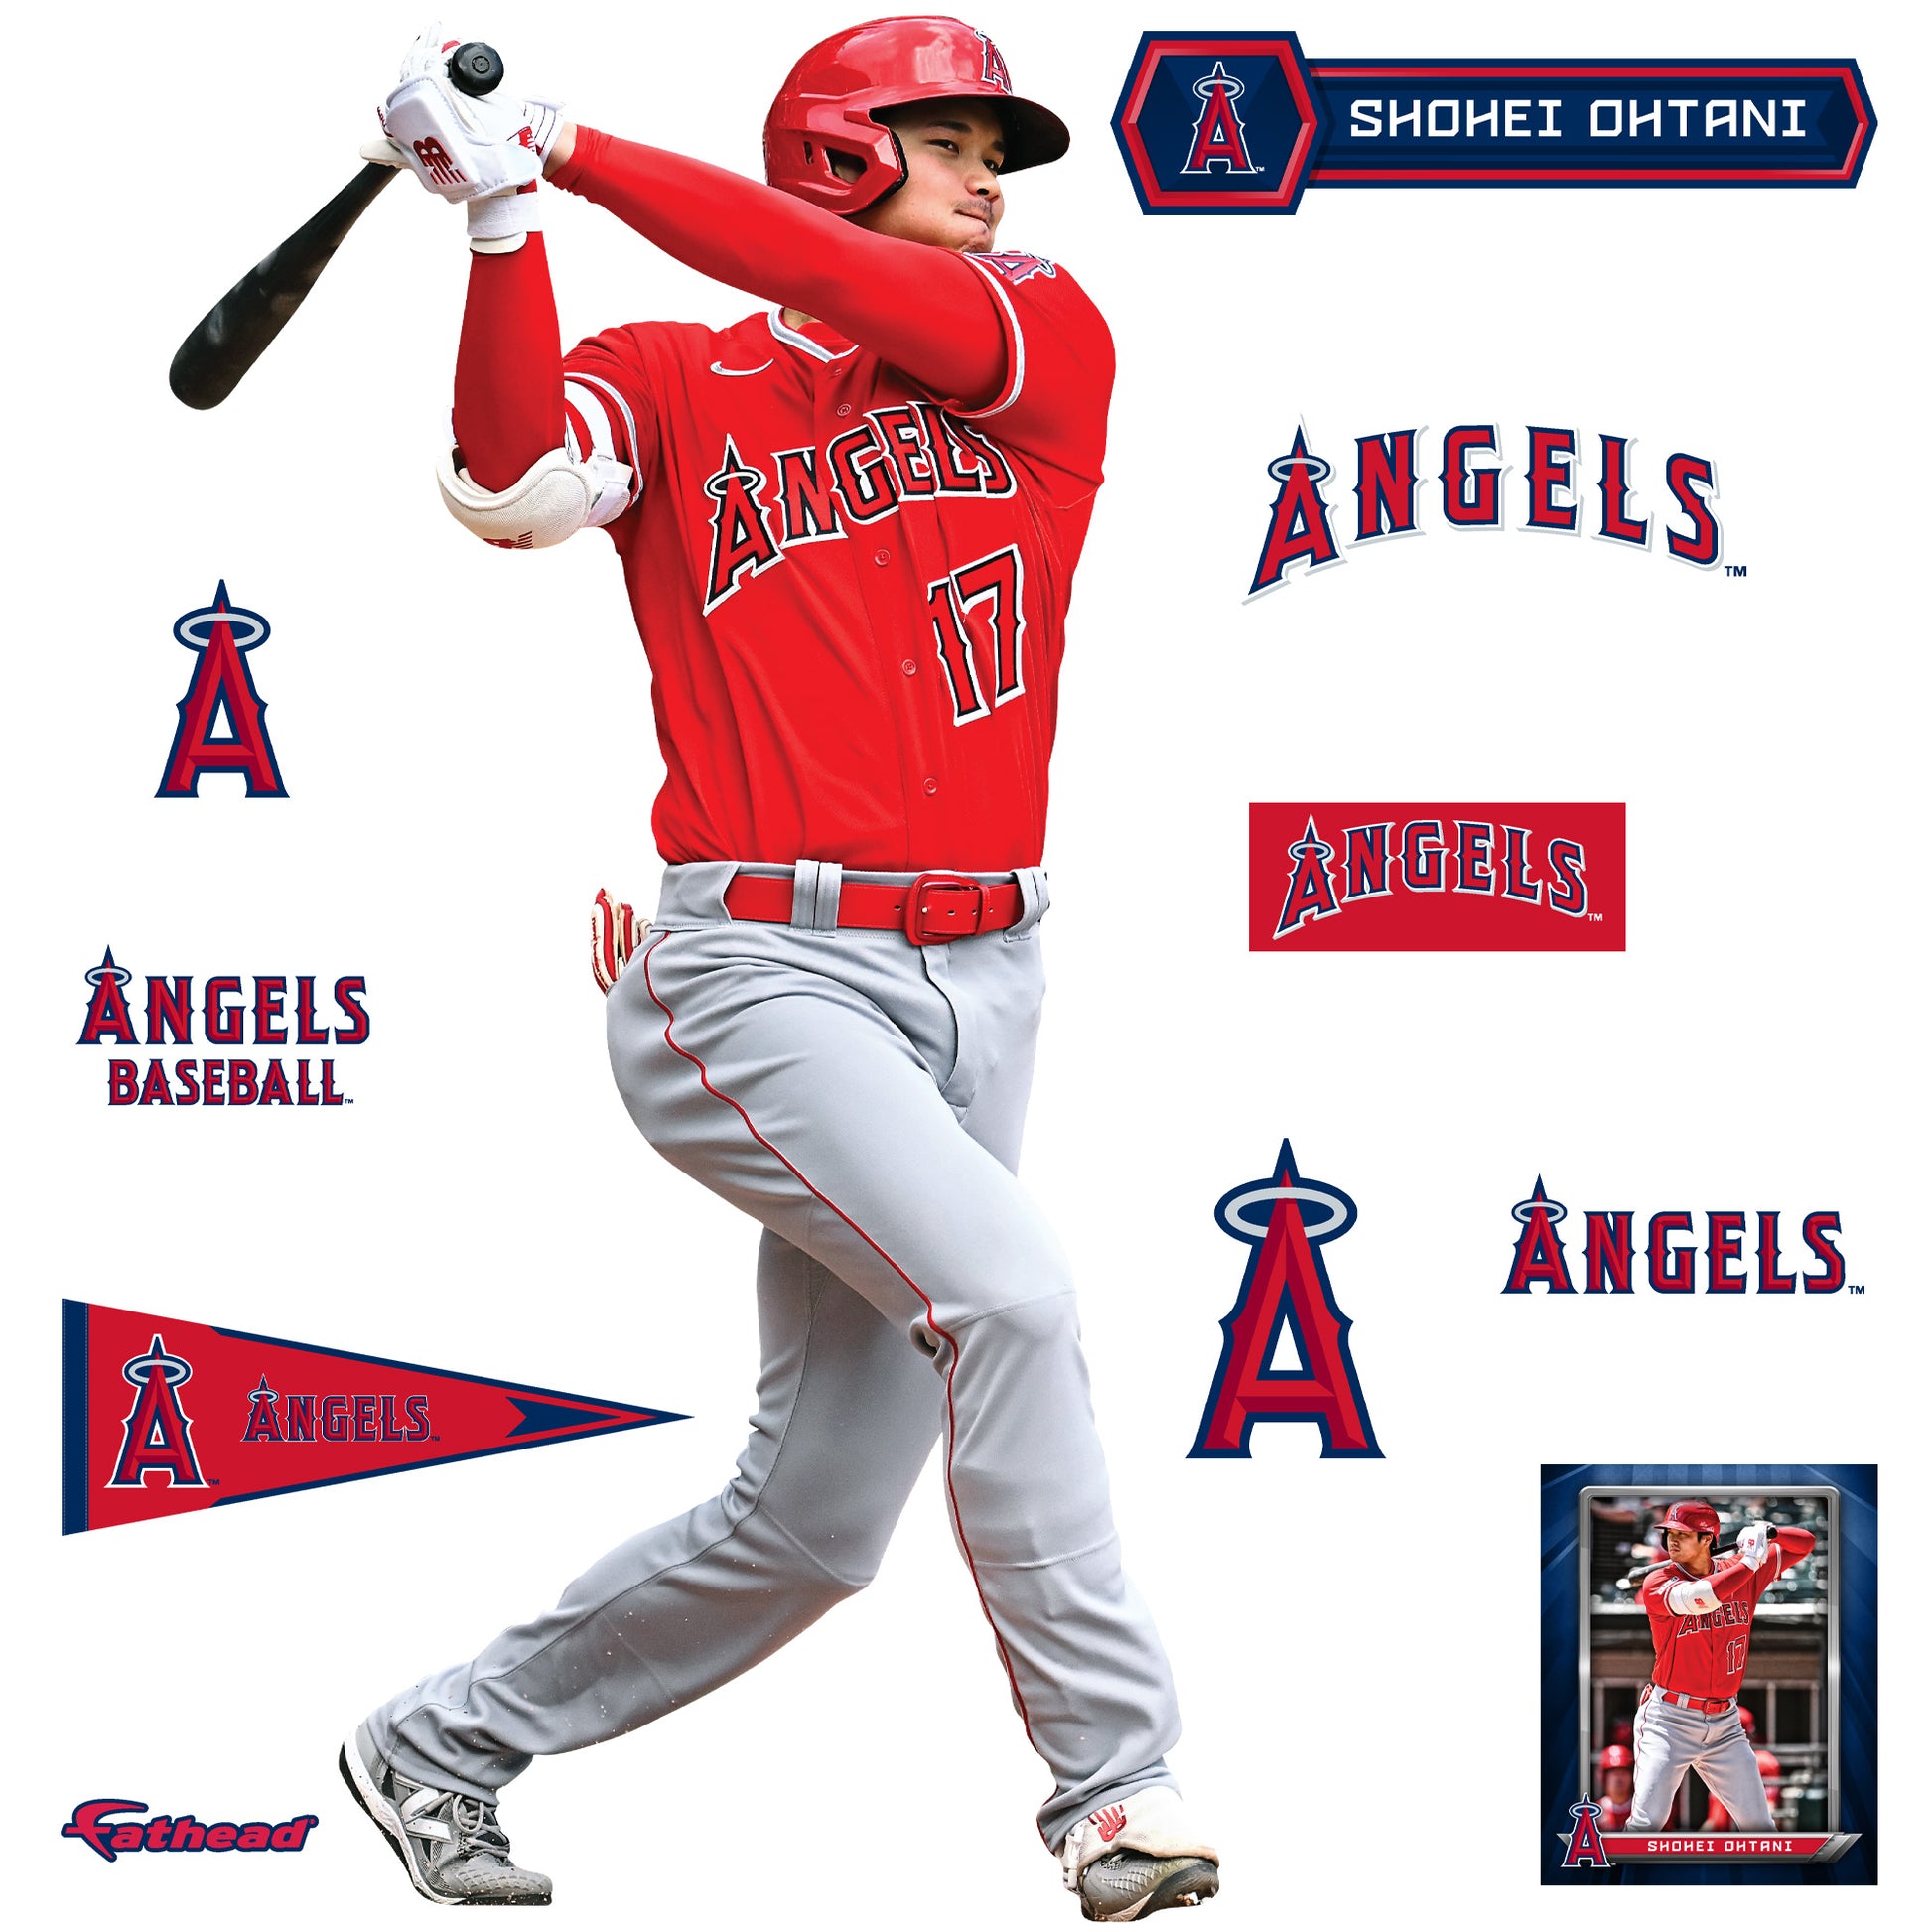 Shohei Ohtani of the Los Angeles Angels looks at an iPad in the in 2023